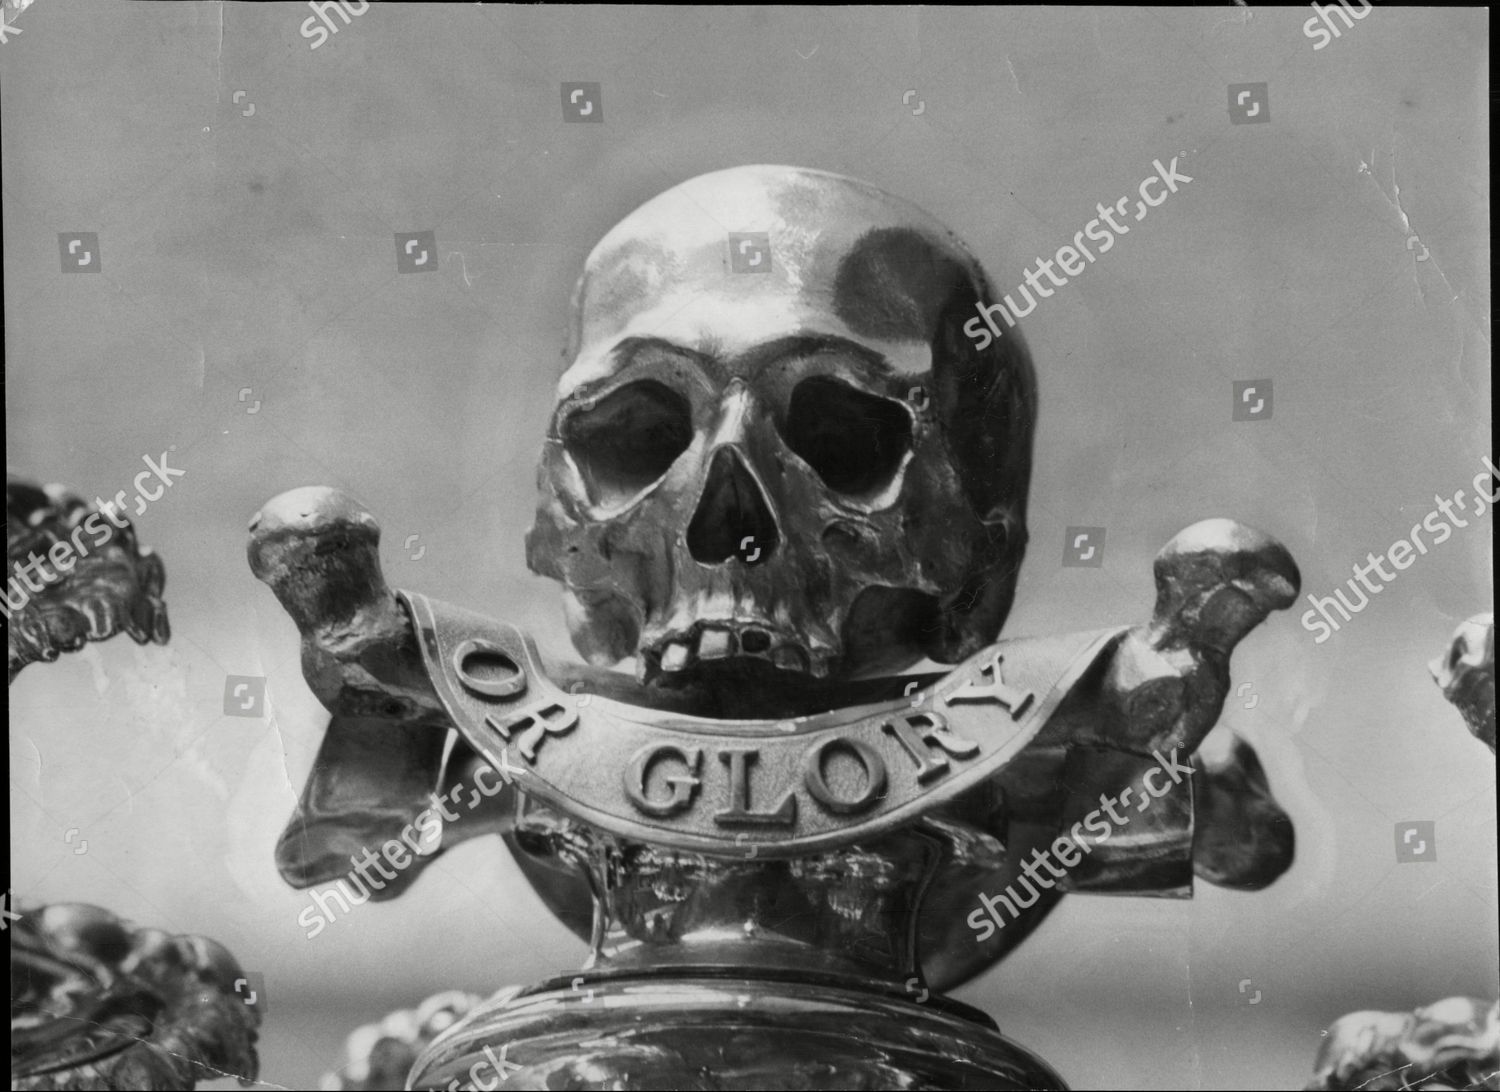 death glory crest on candelabrum one items editorial stock photo stock image shutterstock https www shutterstock com editorial image editorial death or glory crest on a candelabrum one of the items going under the hammer from the lucan familys silver collection the auction is to settle some of the missing earls debts he is wanted in connection with the murder of his childrens nanny 3777110a